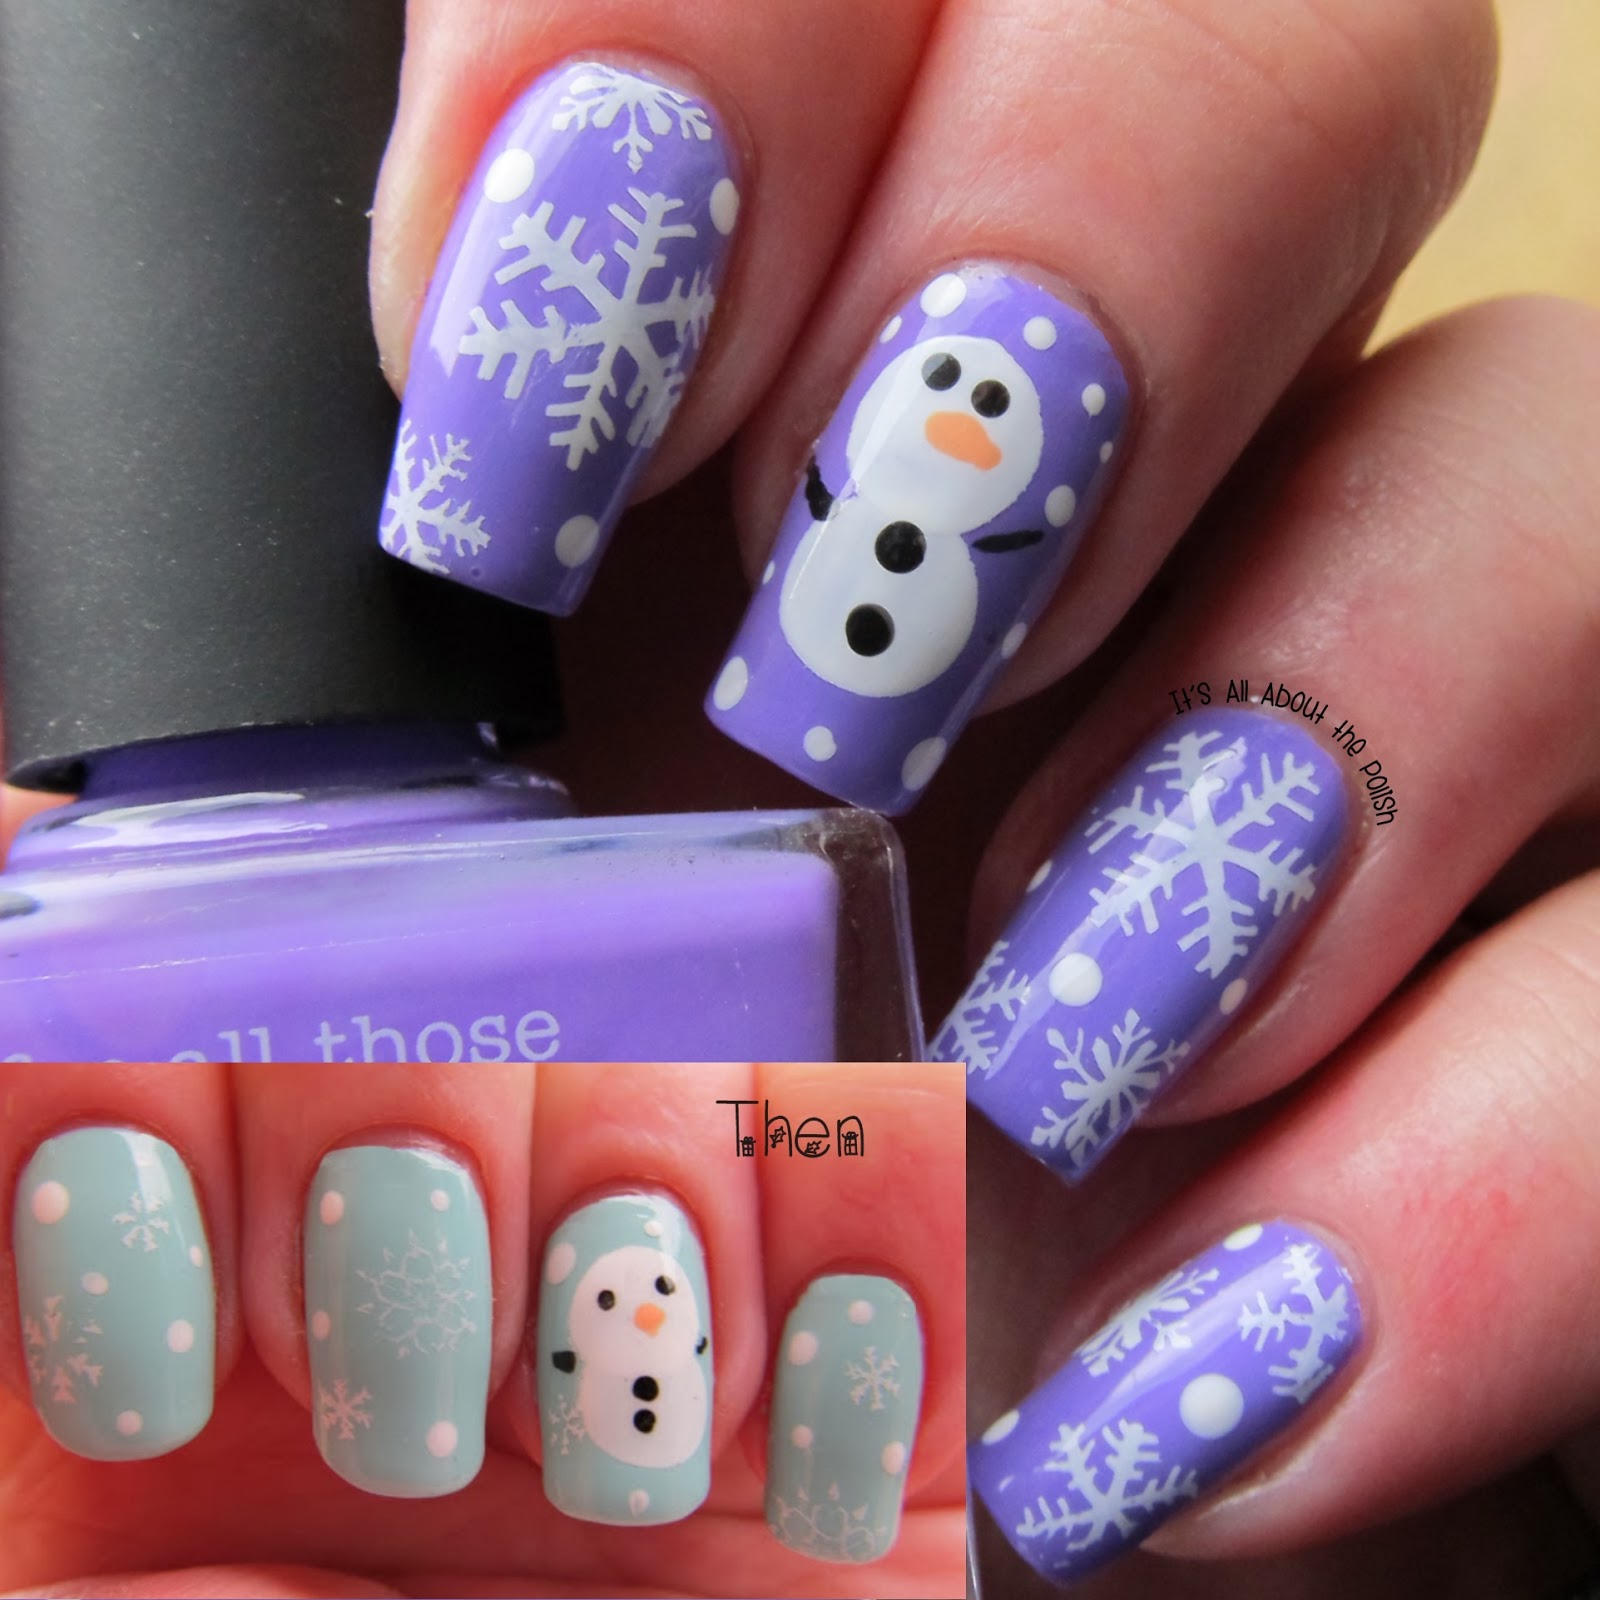 It's all about the polish: 12 days of Christmas Nail Art Challenge ...